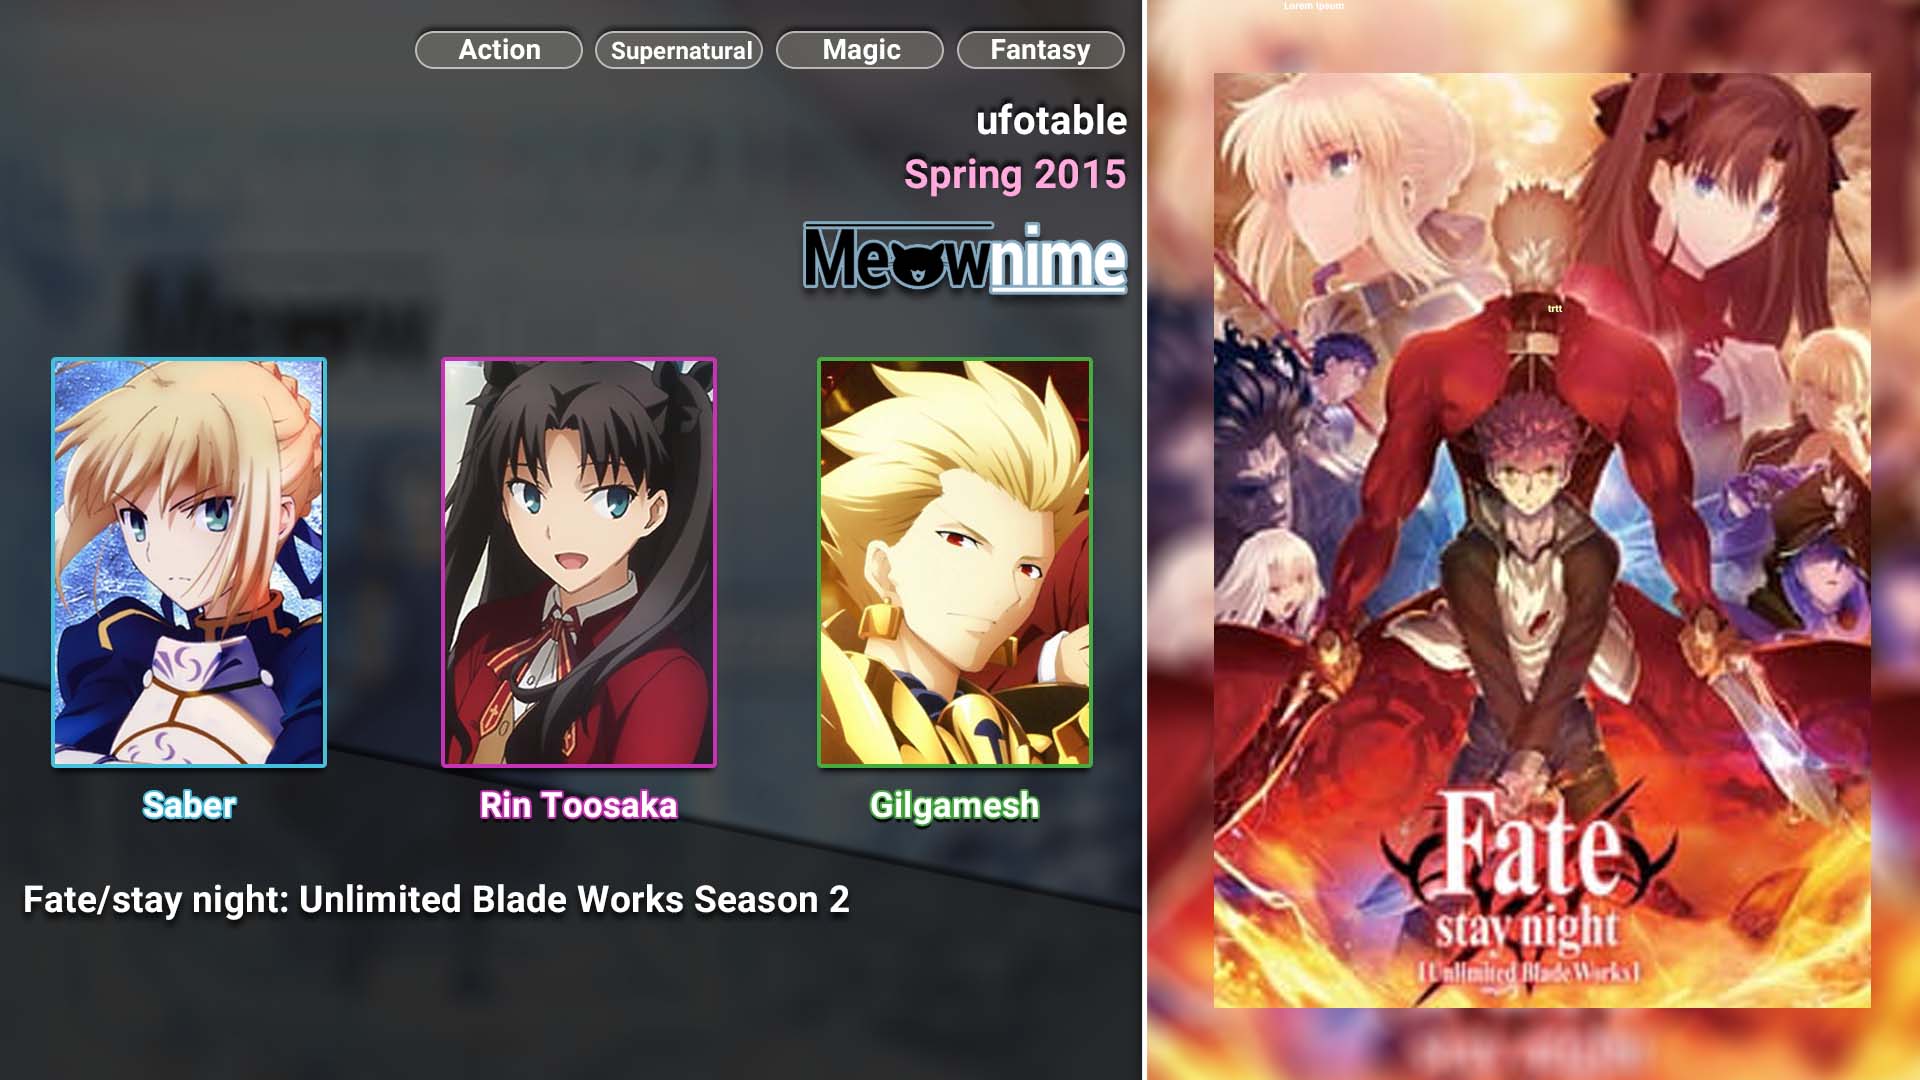 Fate stay night Unlimited Blade Works Season 2